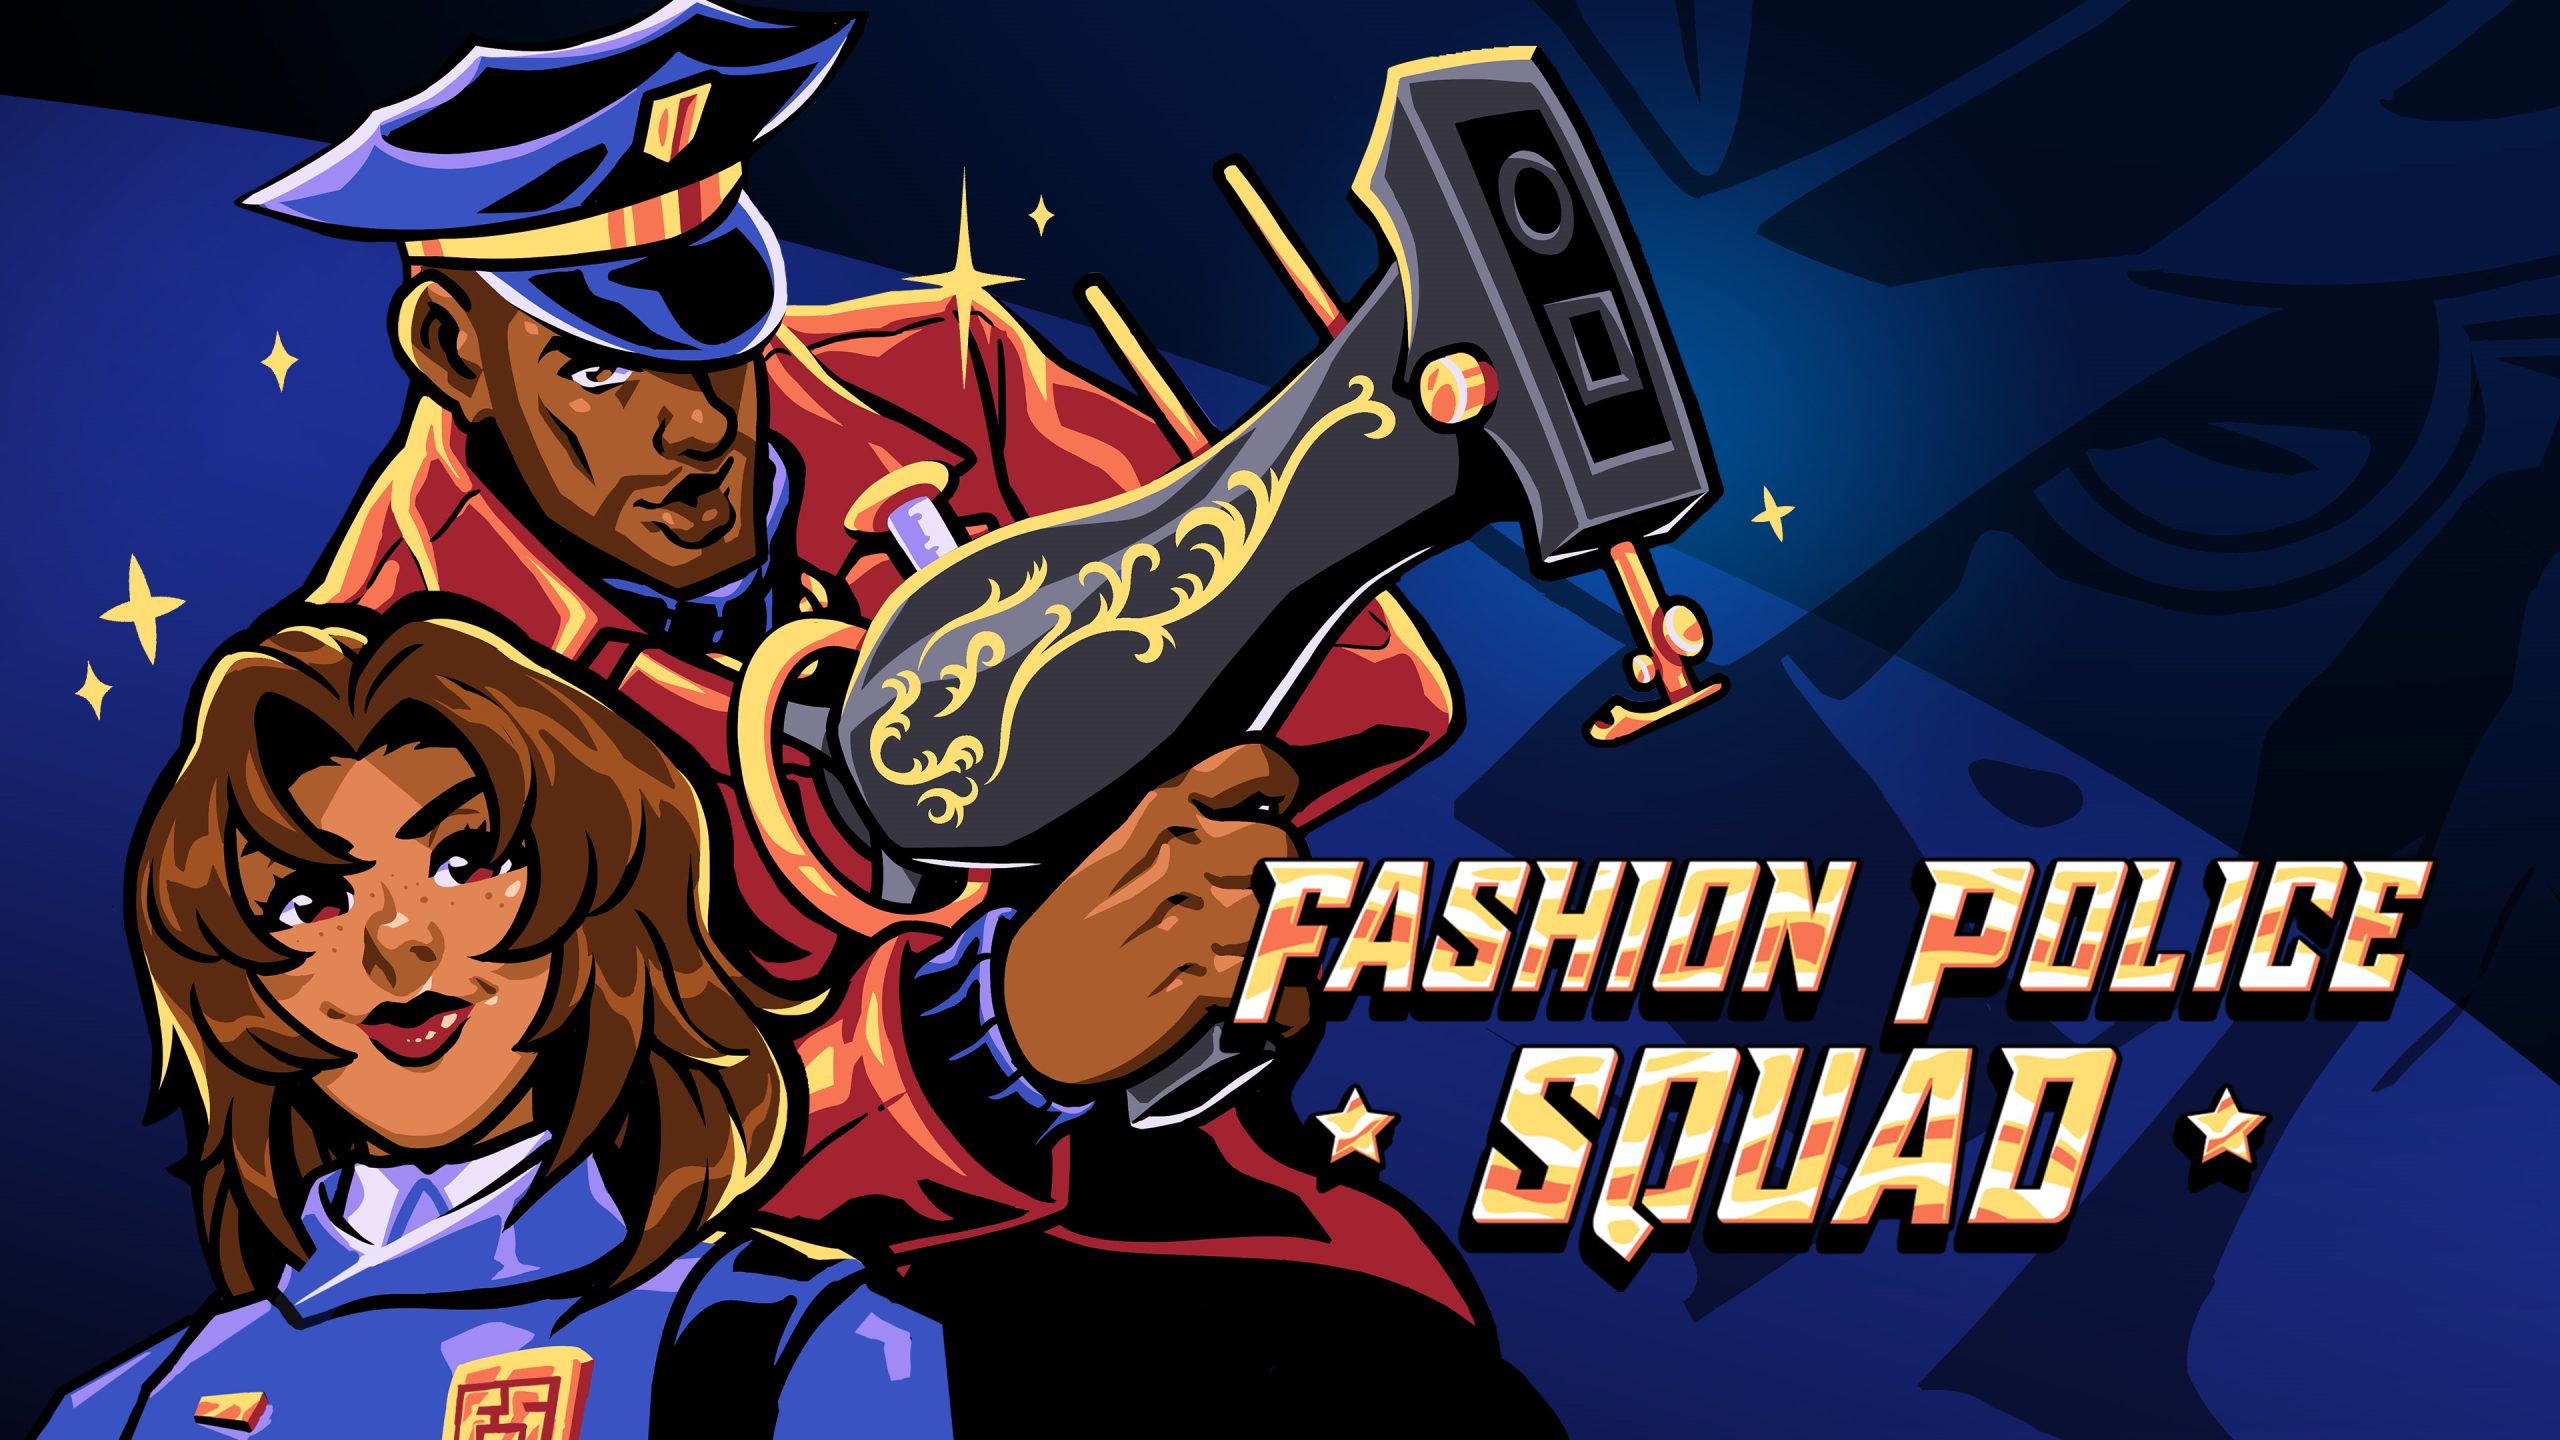 Fashion Police Squad is getting console ports